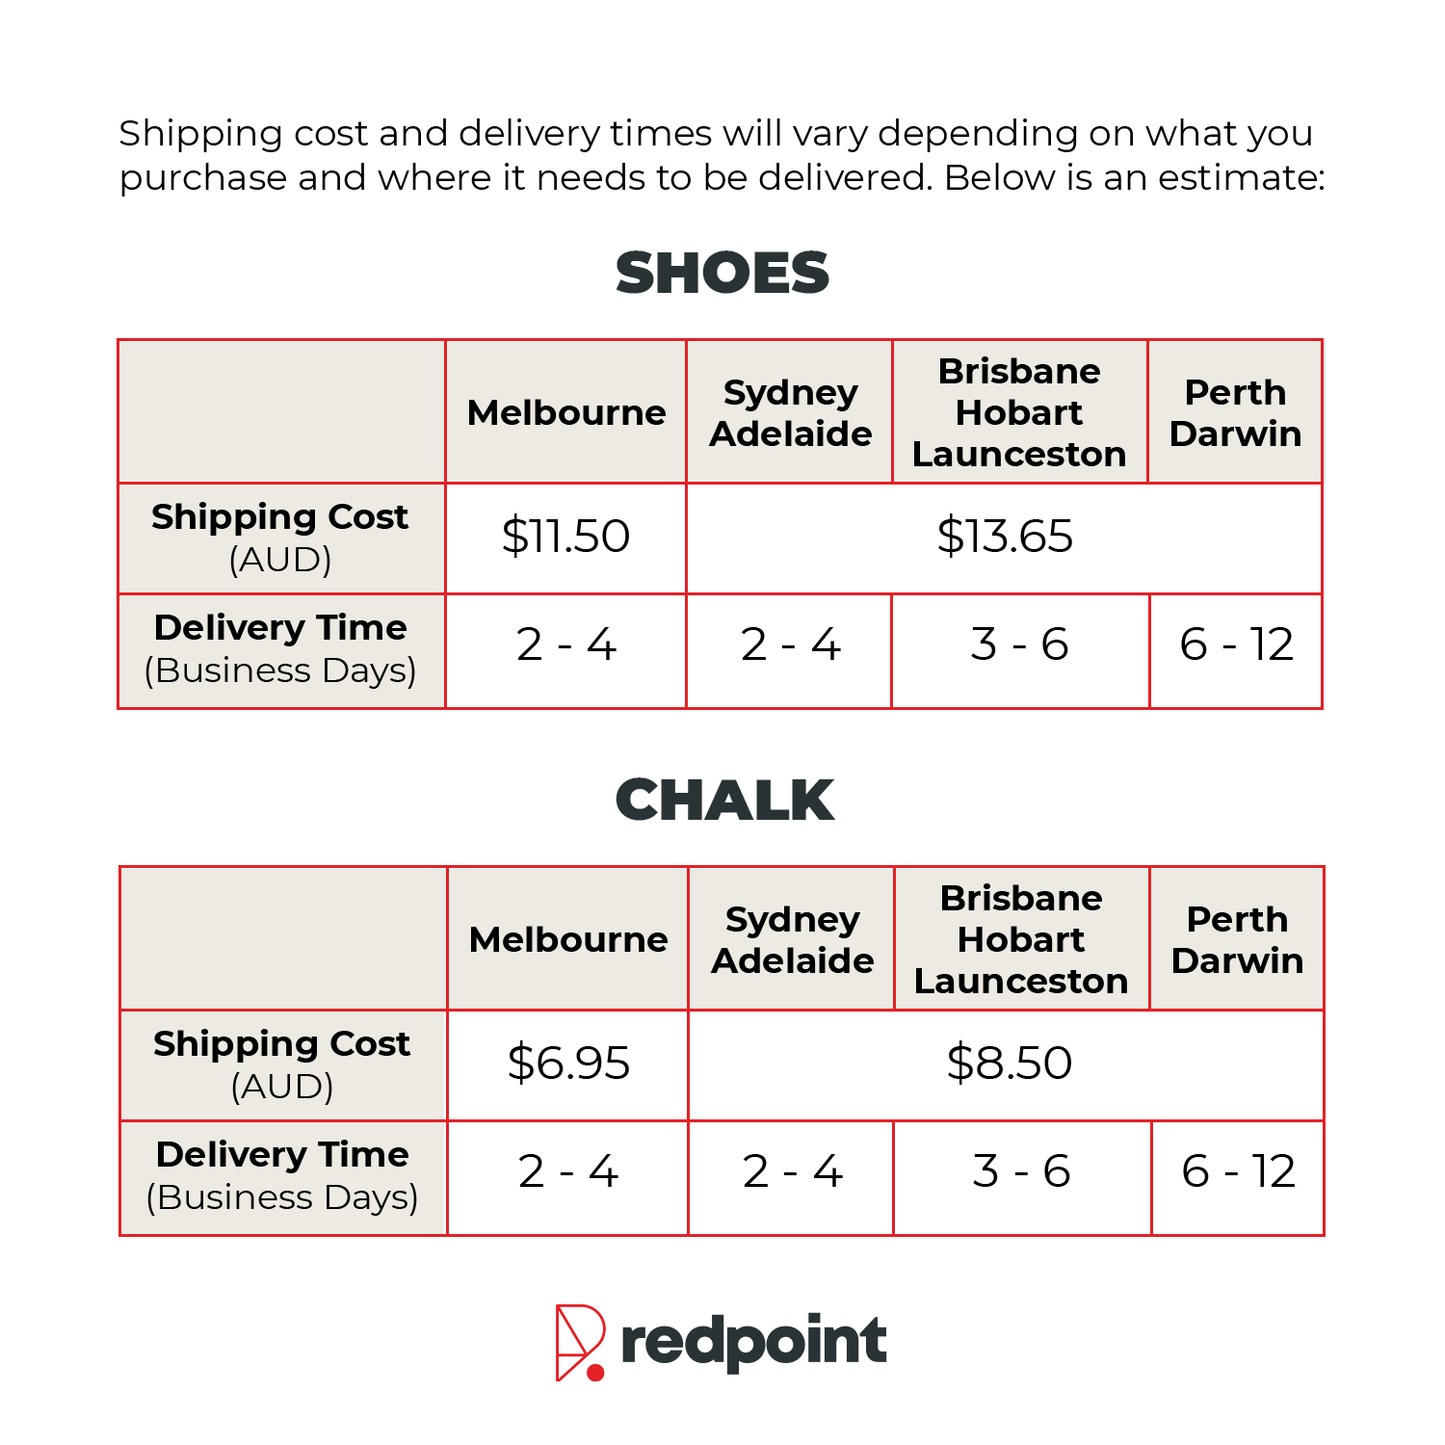 Redpoint Climbing Shoes Shipping Cost and delivery time estimates